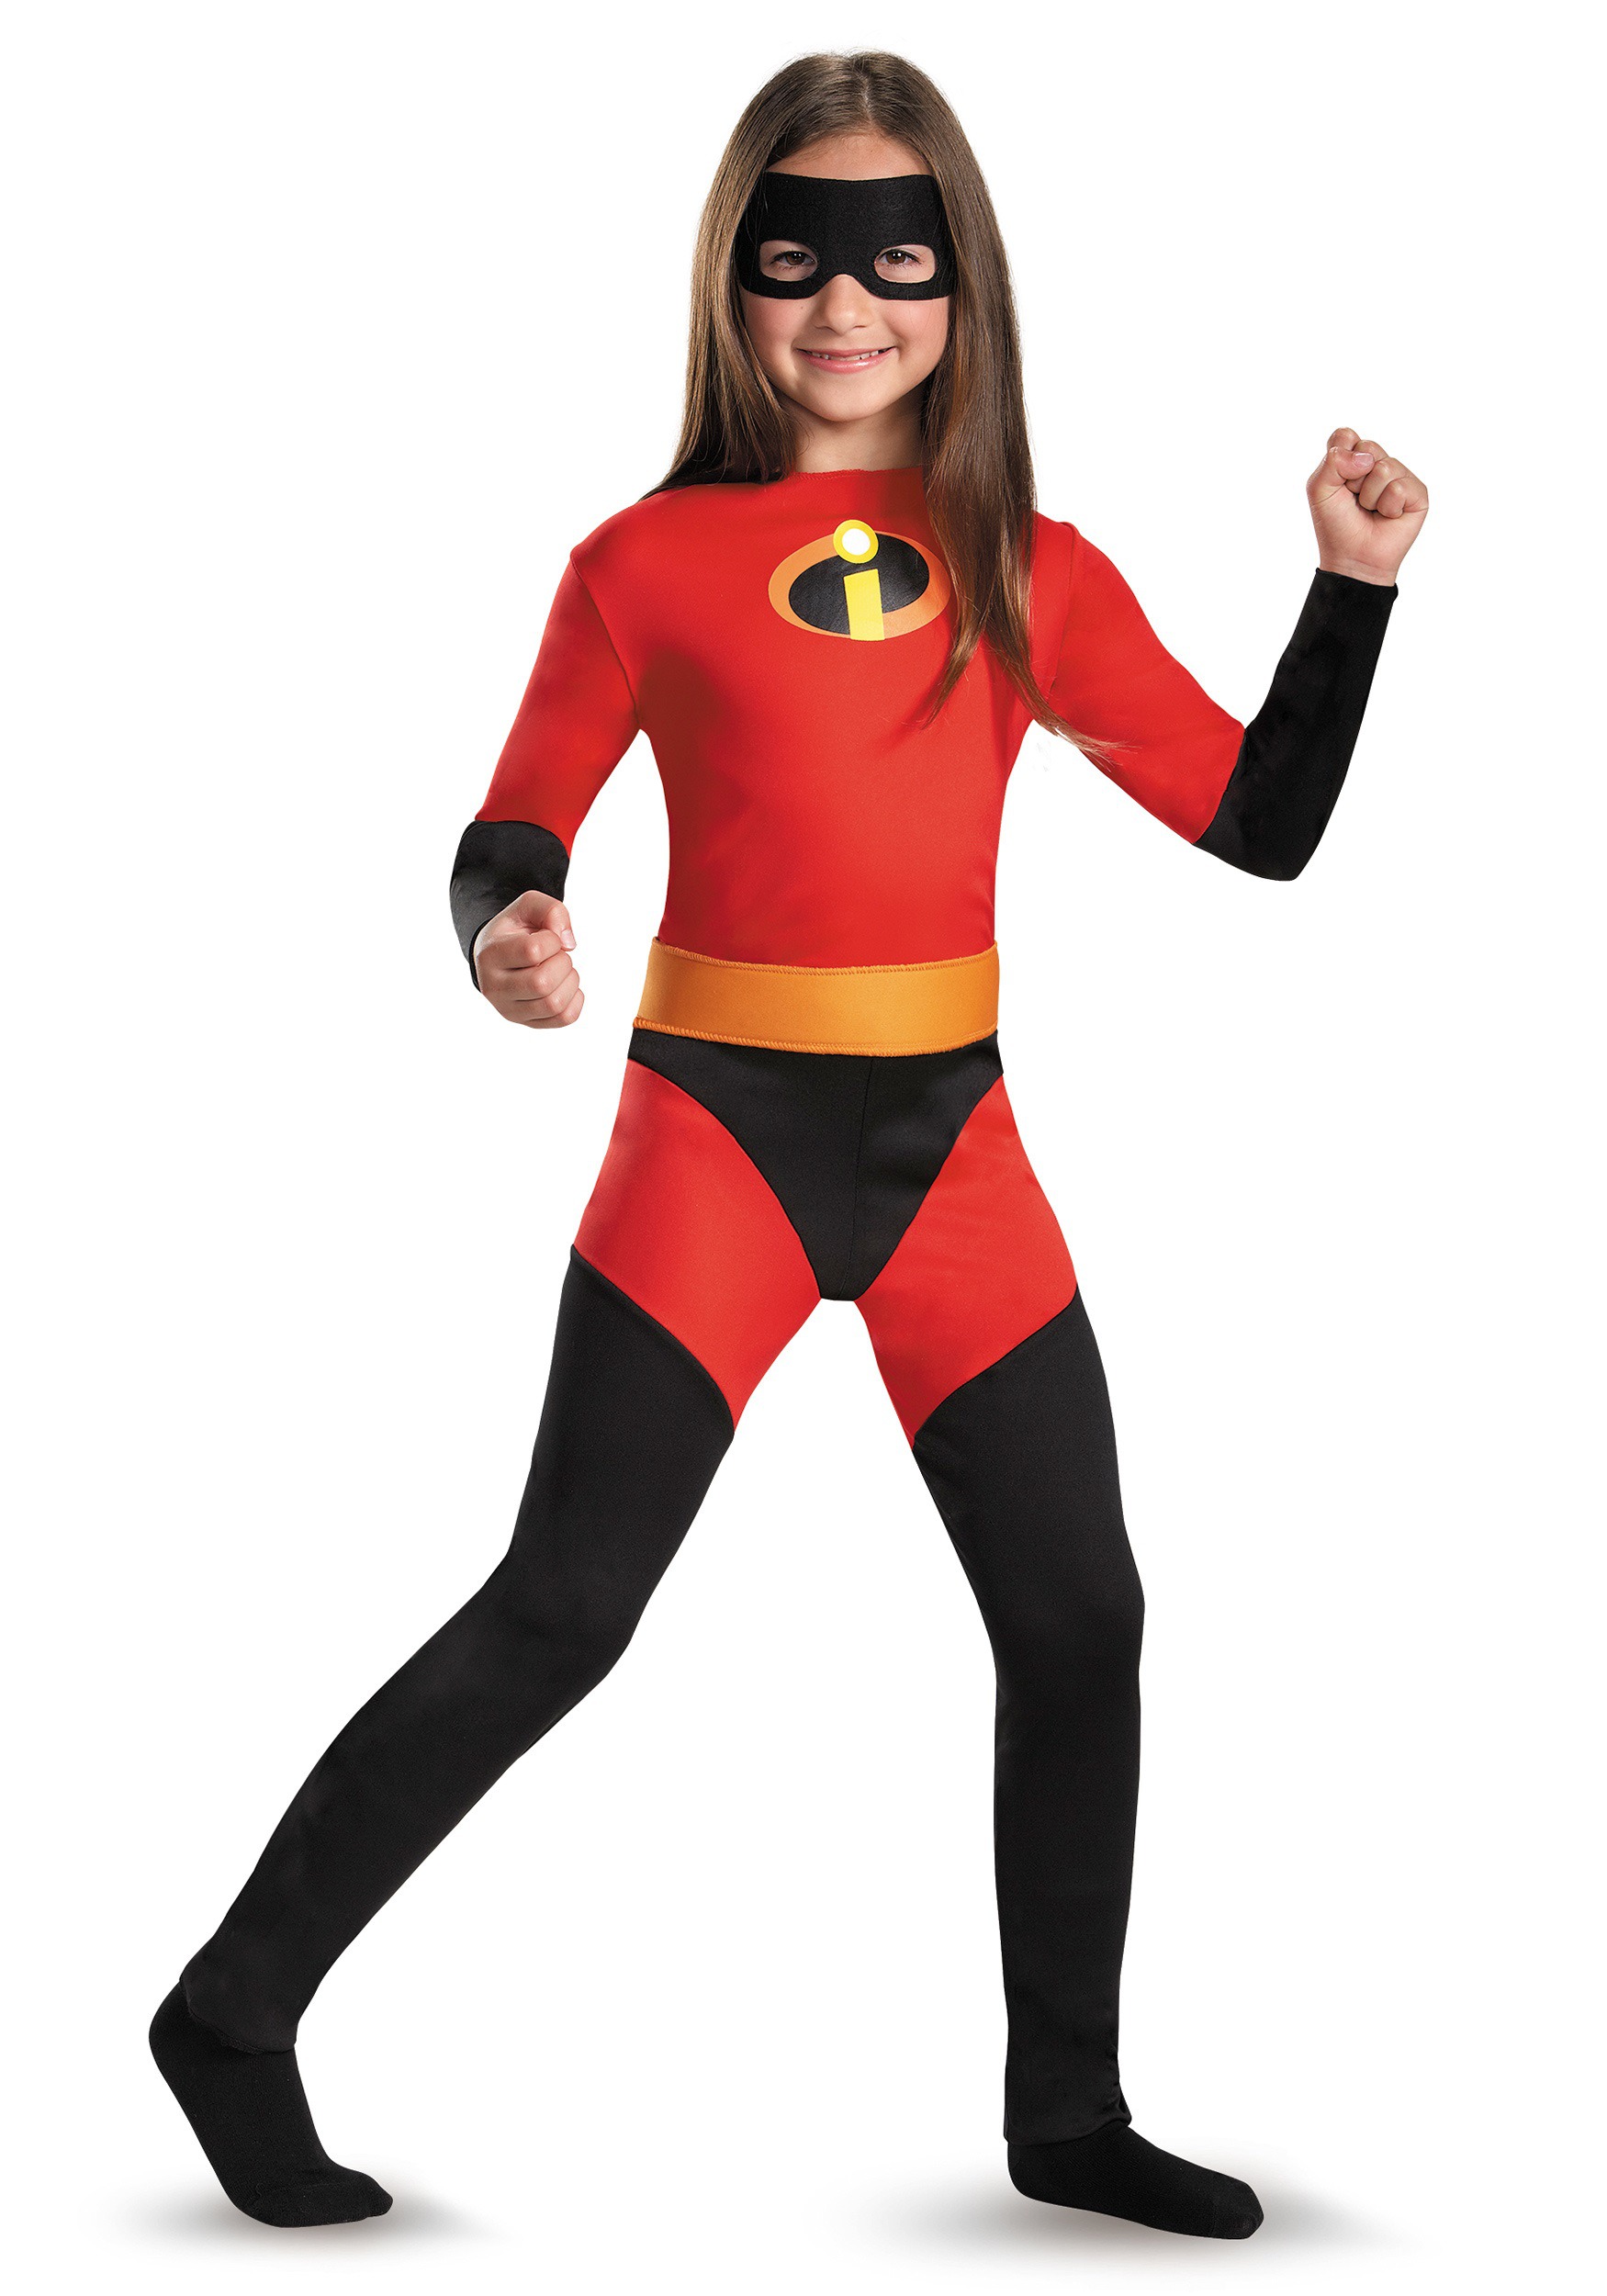 Photos - Fancy Dress Violet Disguise  Incredibles Girl's Costume Black/Orange/Red DI6475 